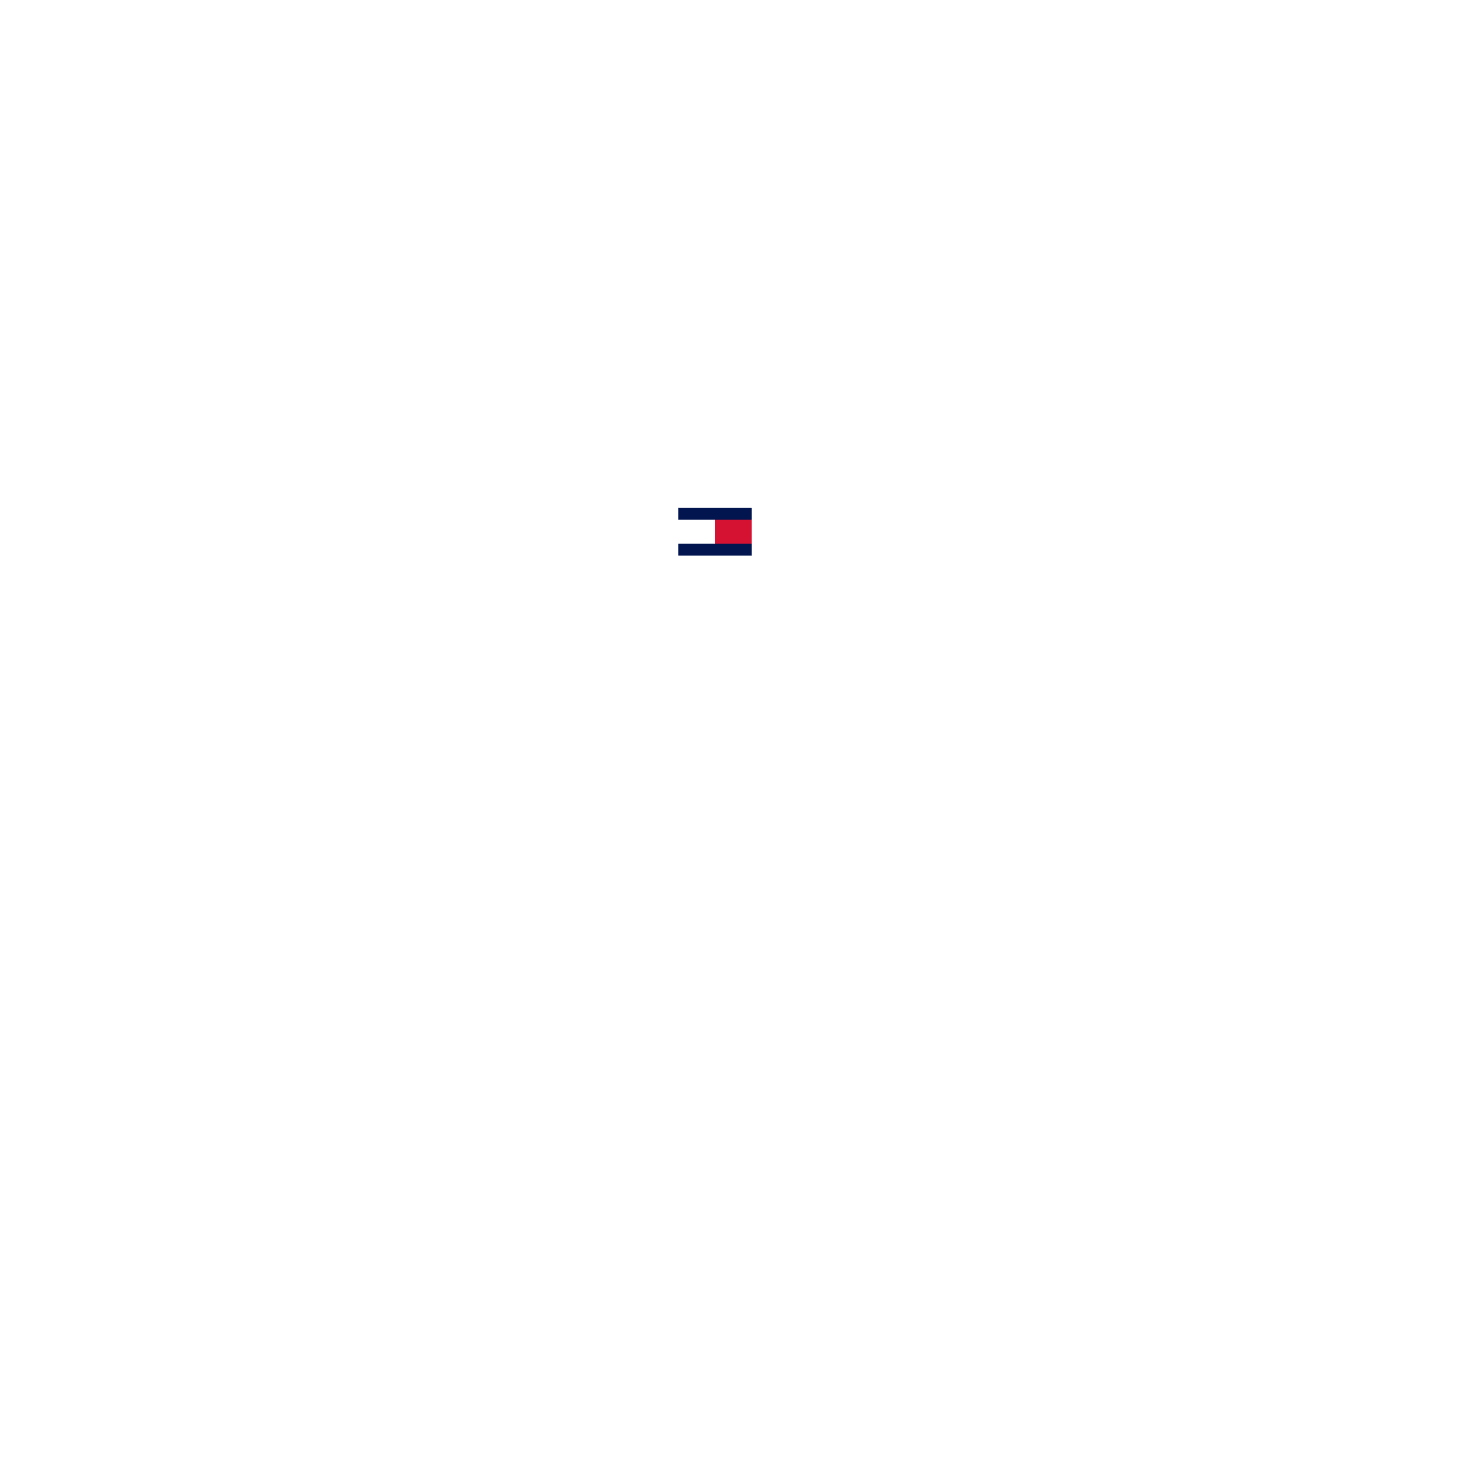 THE BRANDS